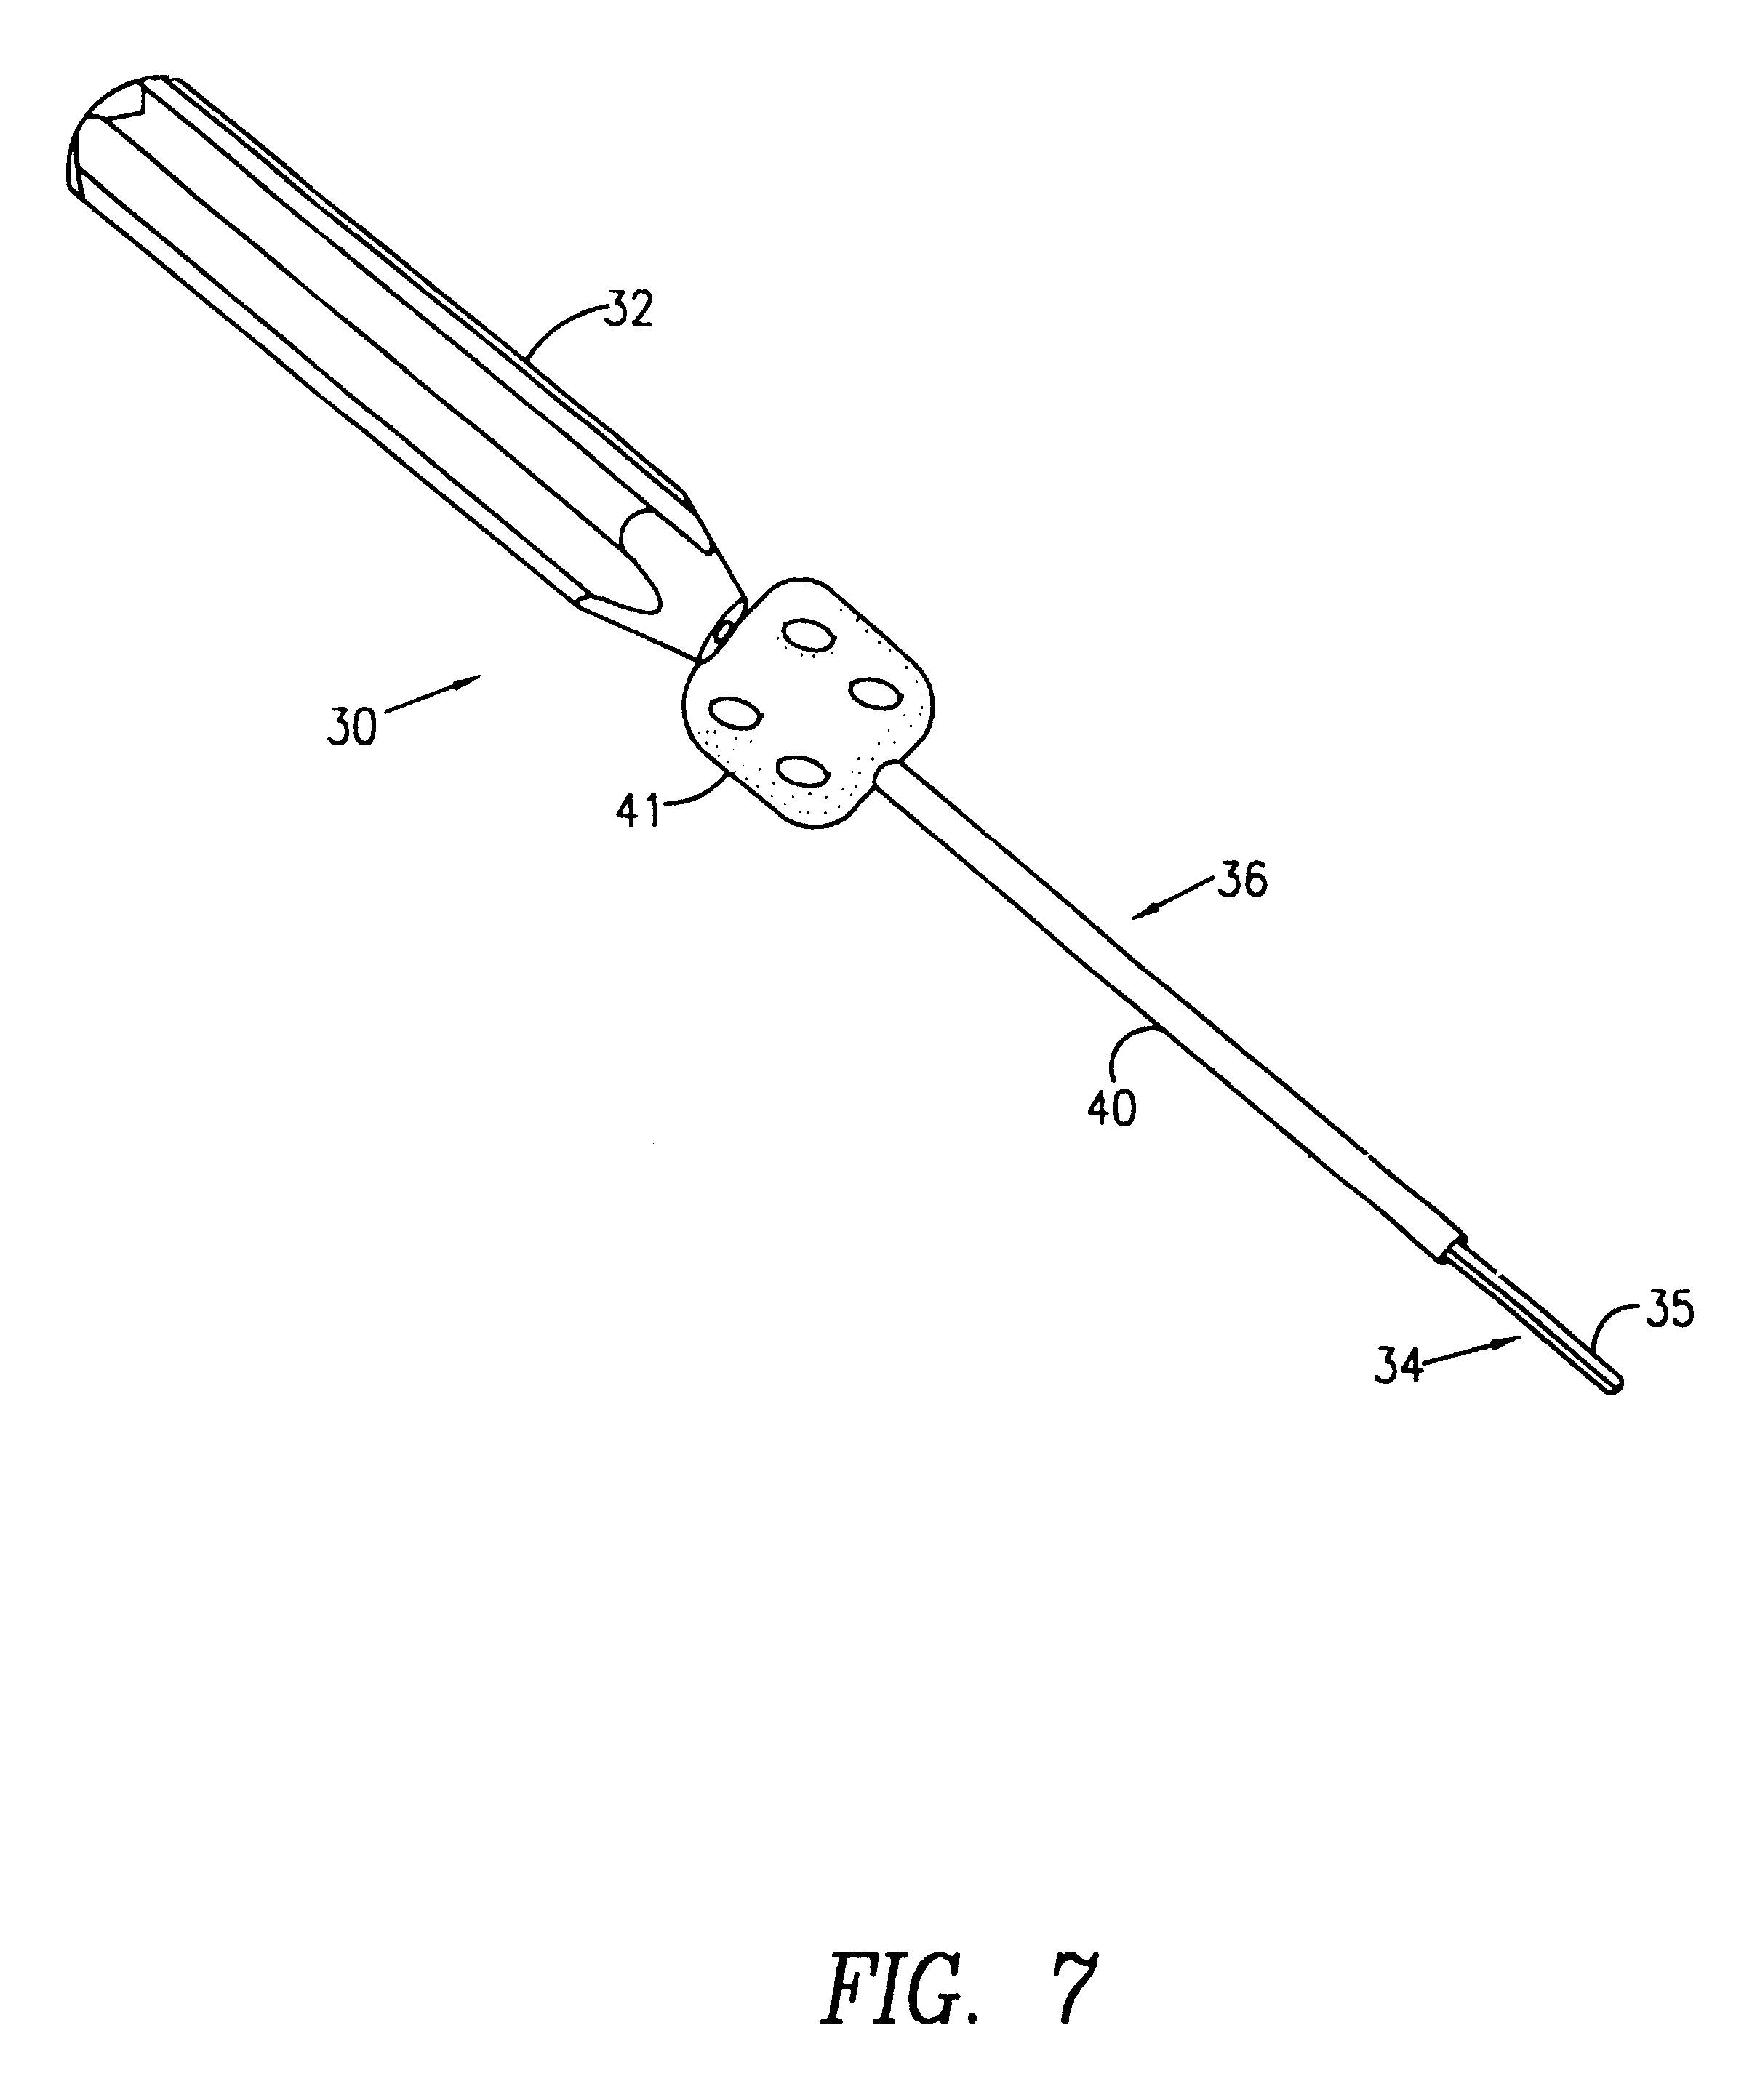 Graft fixation using a screw or plug against suture or tissue